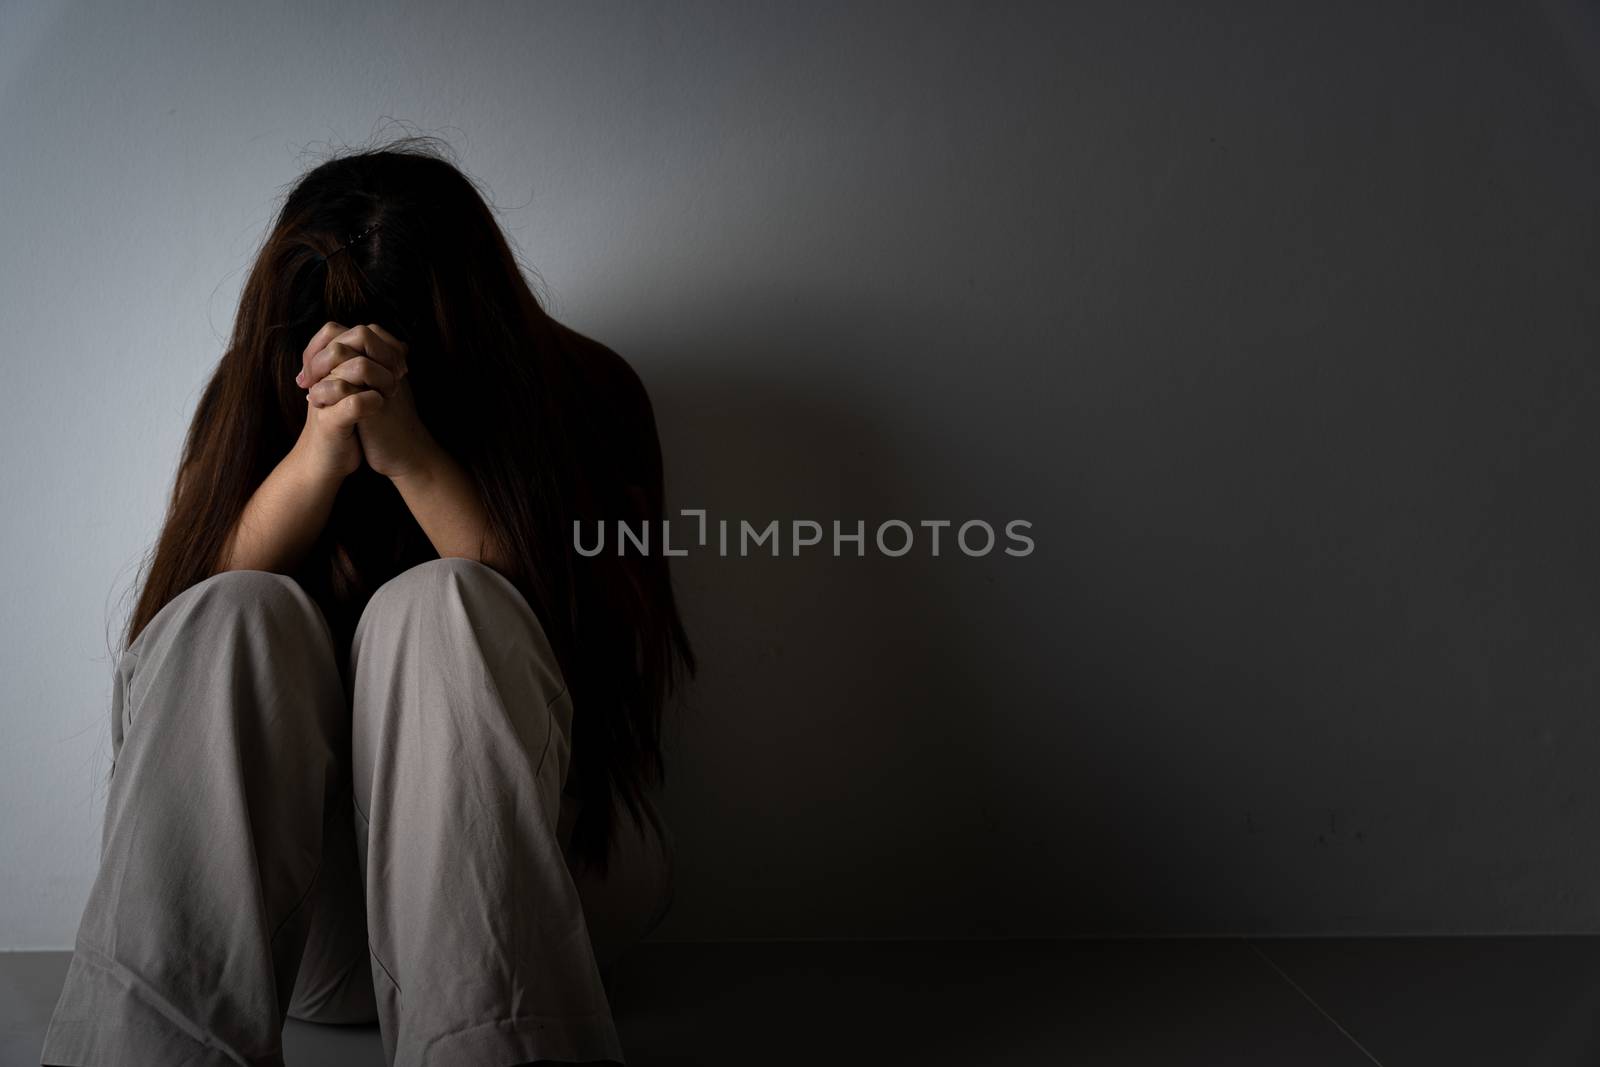 sad woman hug her knee and cry sitting alone in a dark room. Depression, unhappy, stressed and anxiety disorder concept.